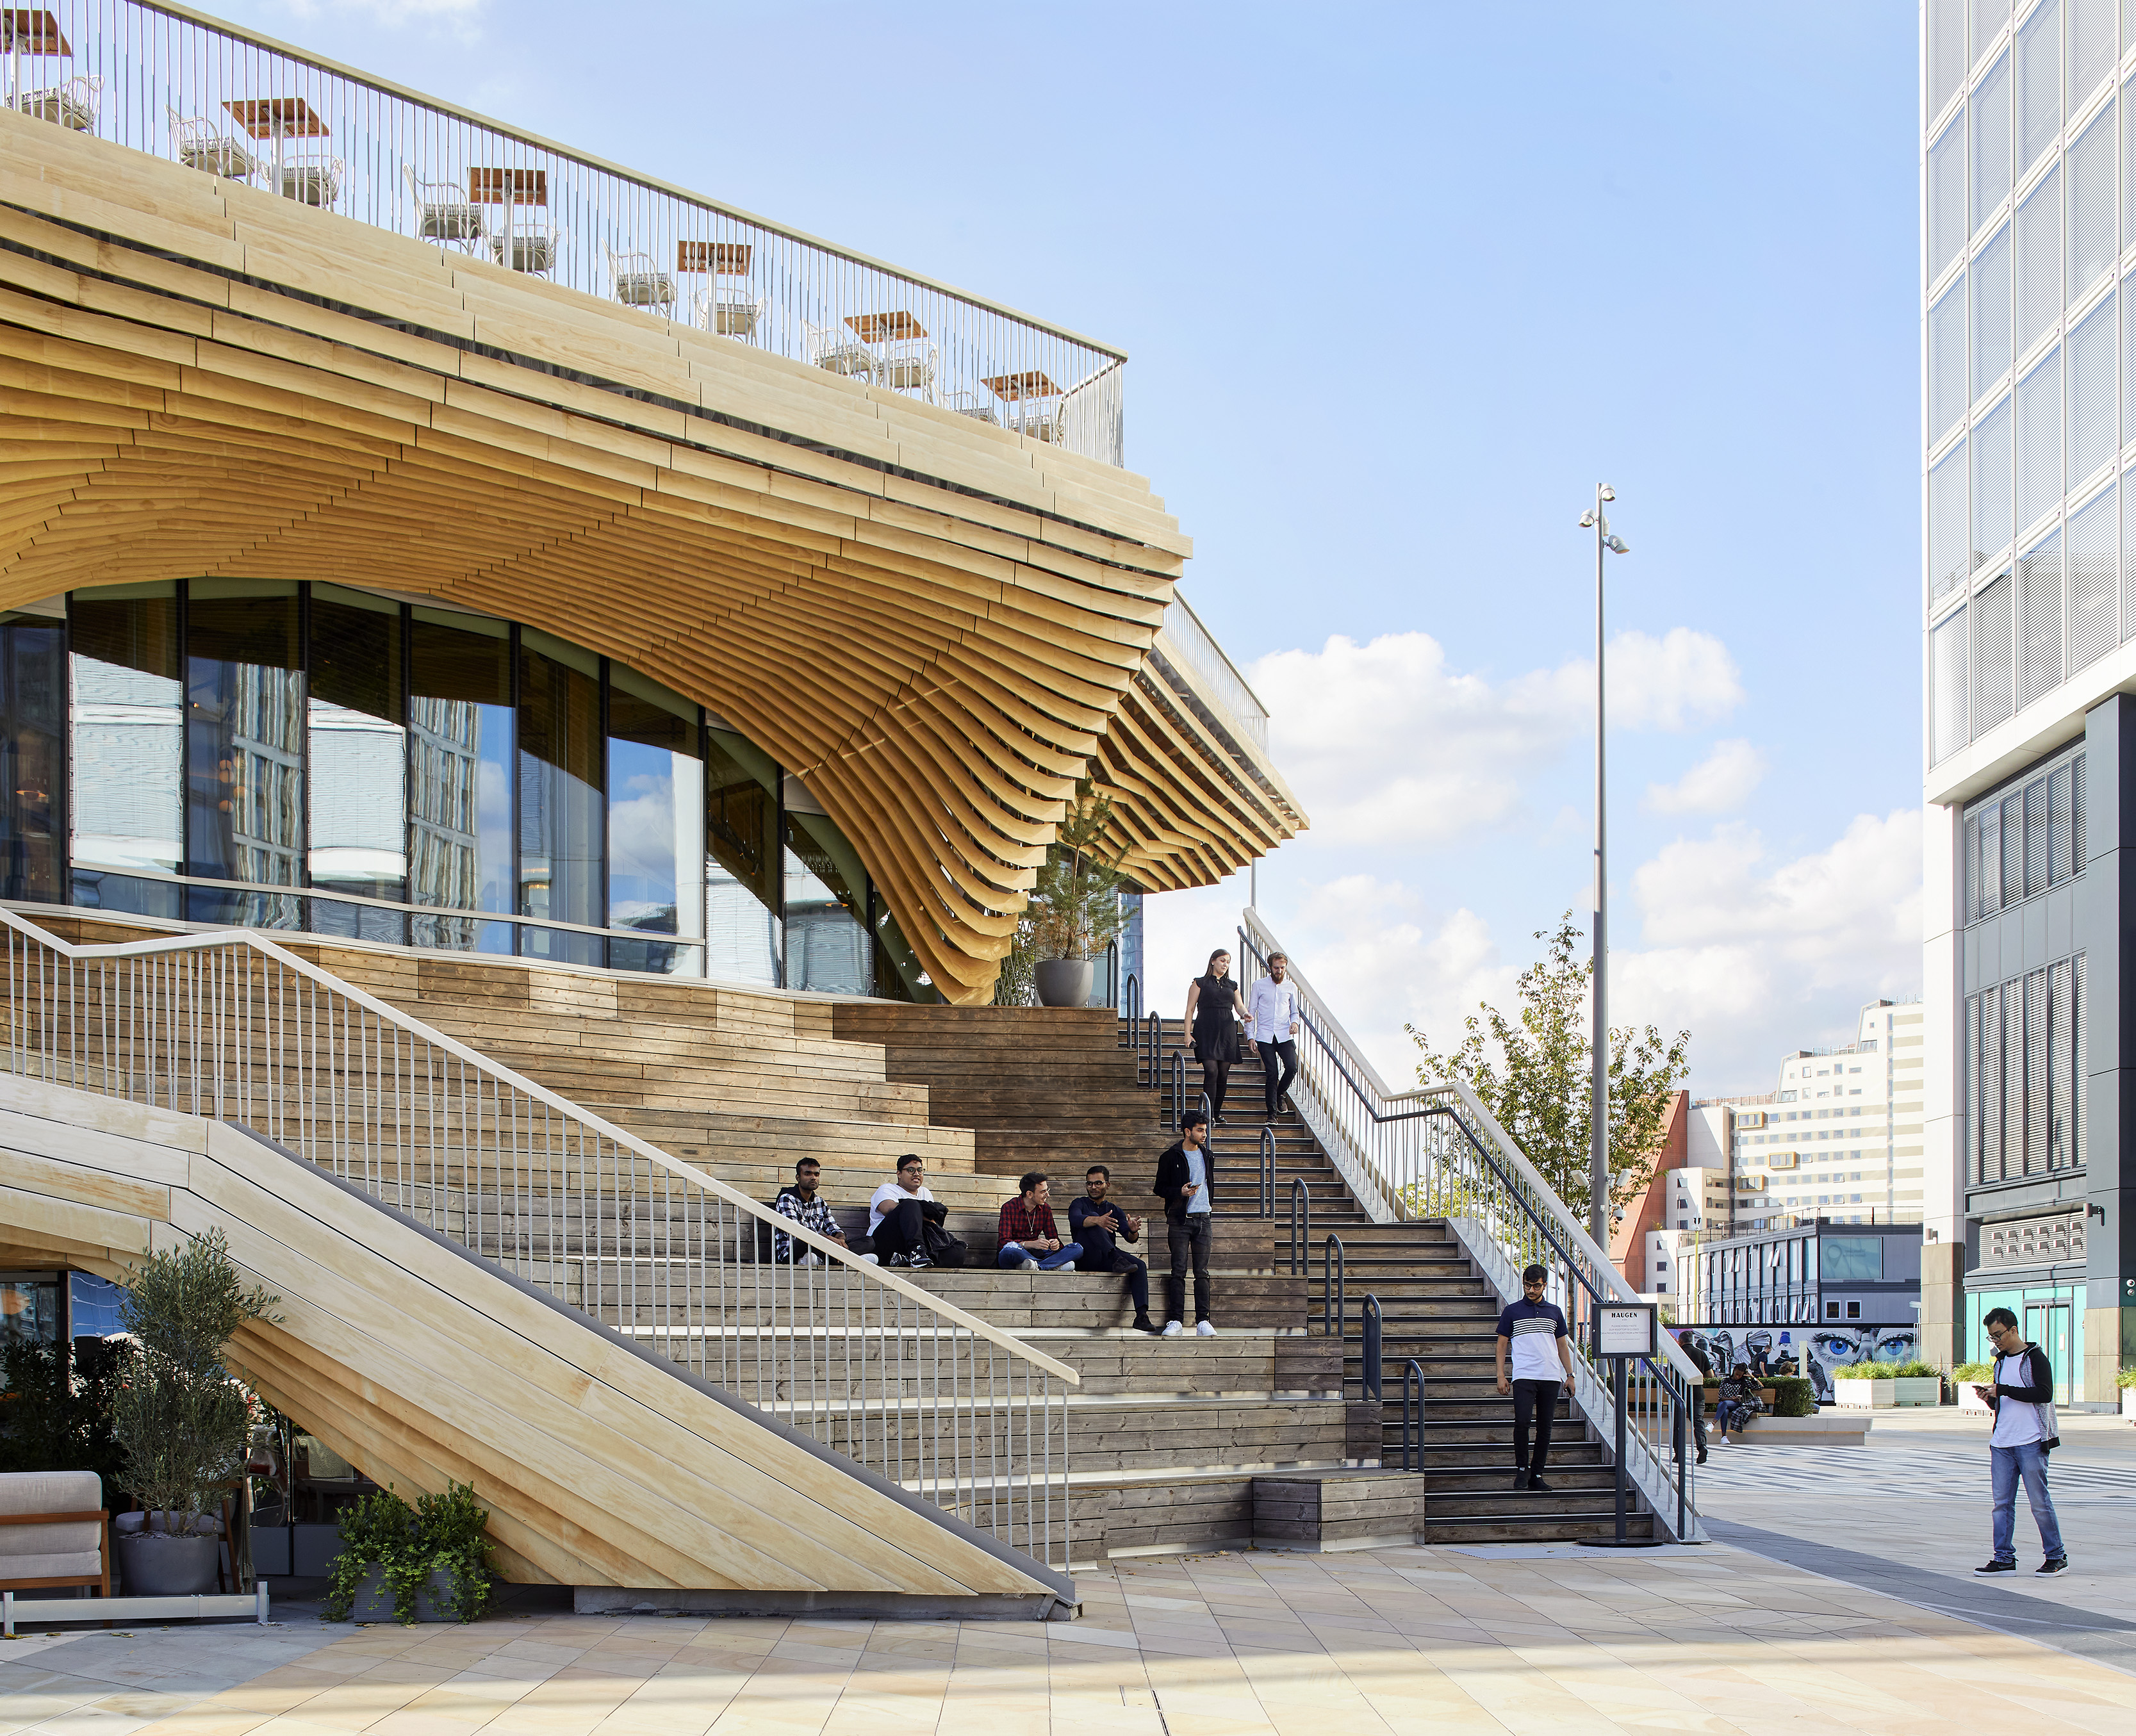 The Pavilion by ACME is a new meeting place for London